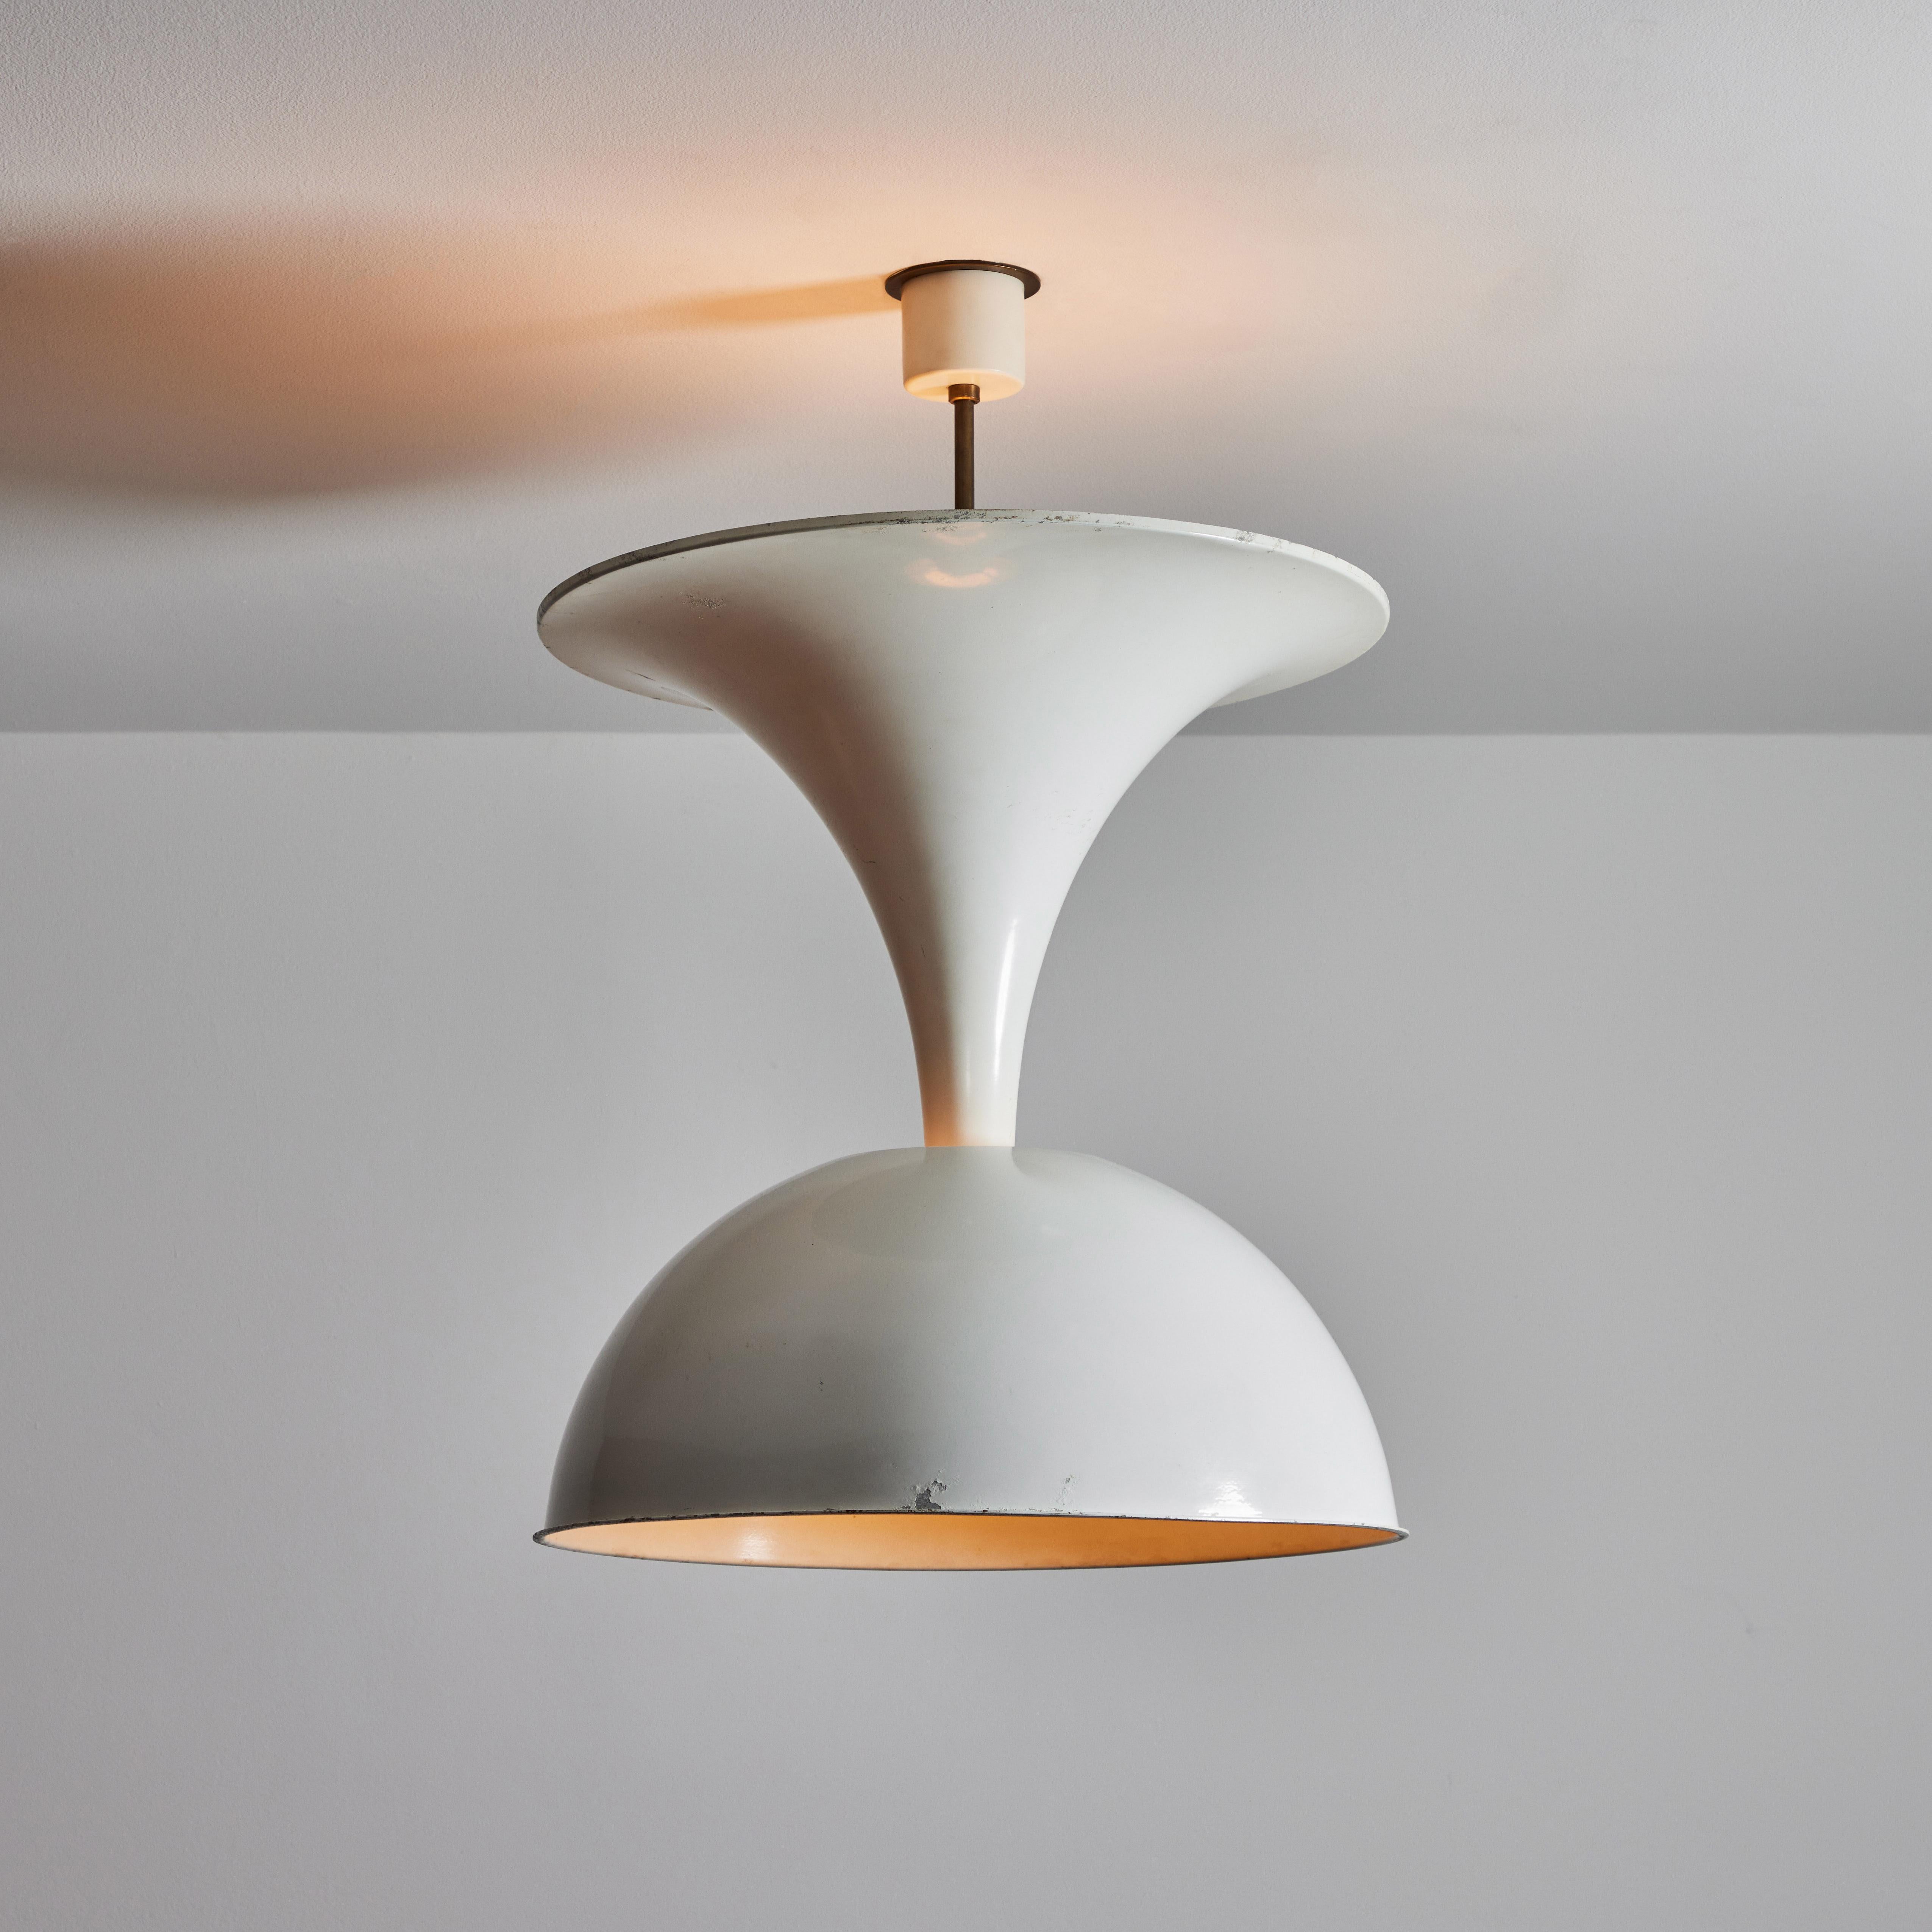 Sculptural ceiling light by Valenti. Designed and manufactured in Italy, circa 1970's. Recommended Lamping: 120v Lower -1 Qty E27 socket 60w frosted bulb. Upper 3 qty E14 Candelabra 40w frosted bulb. Lightbulbs not included.
Qty: 1 AVAILABLE